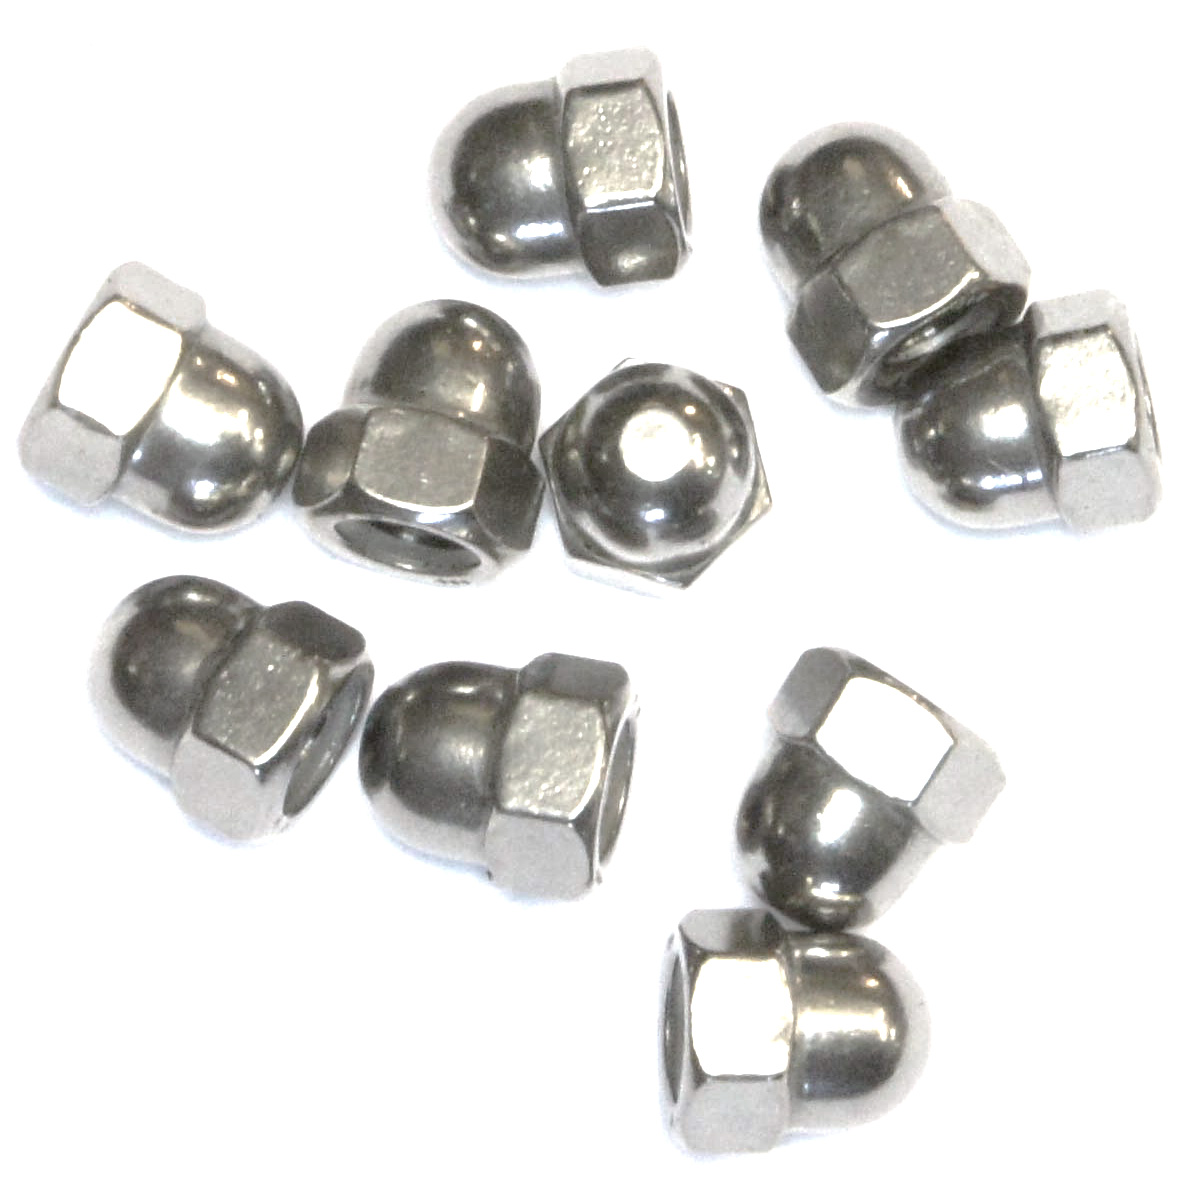 https://www.carbuilder.com/images/thumbs/003/0039287_m8-stainless-acorn-nuts-pack-of-10.jpeg